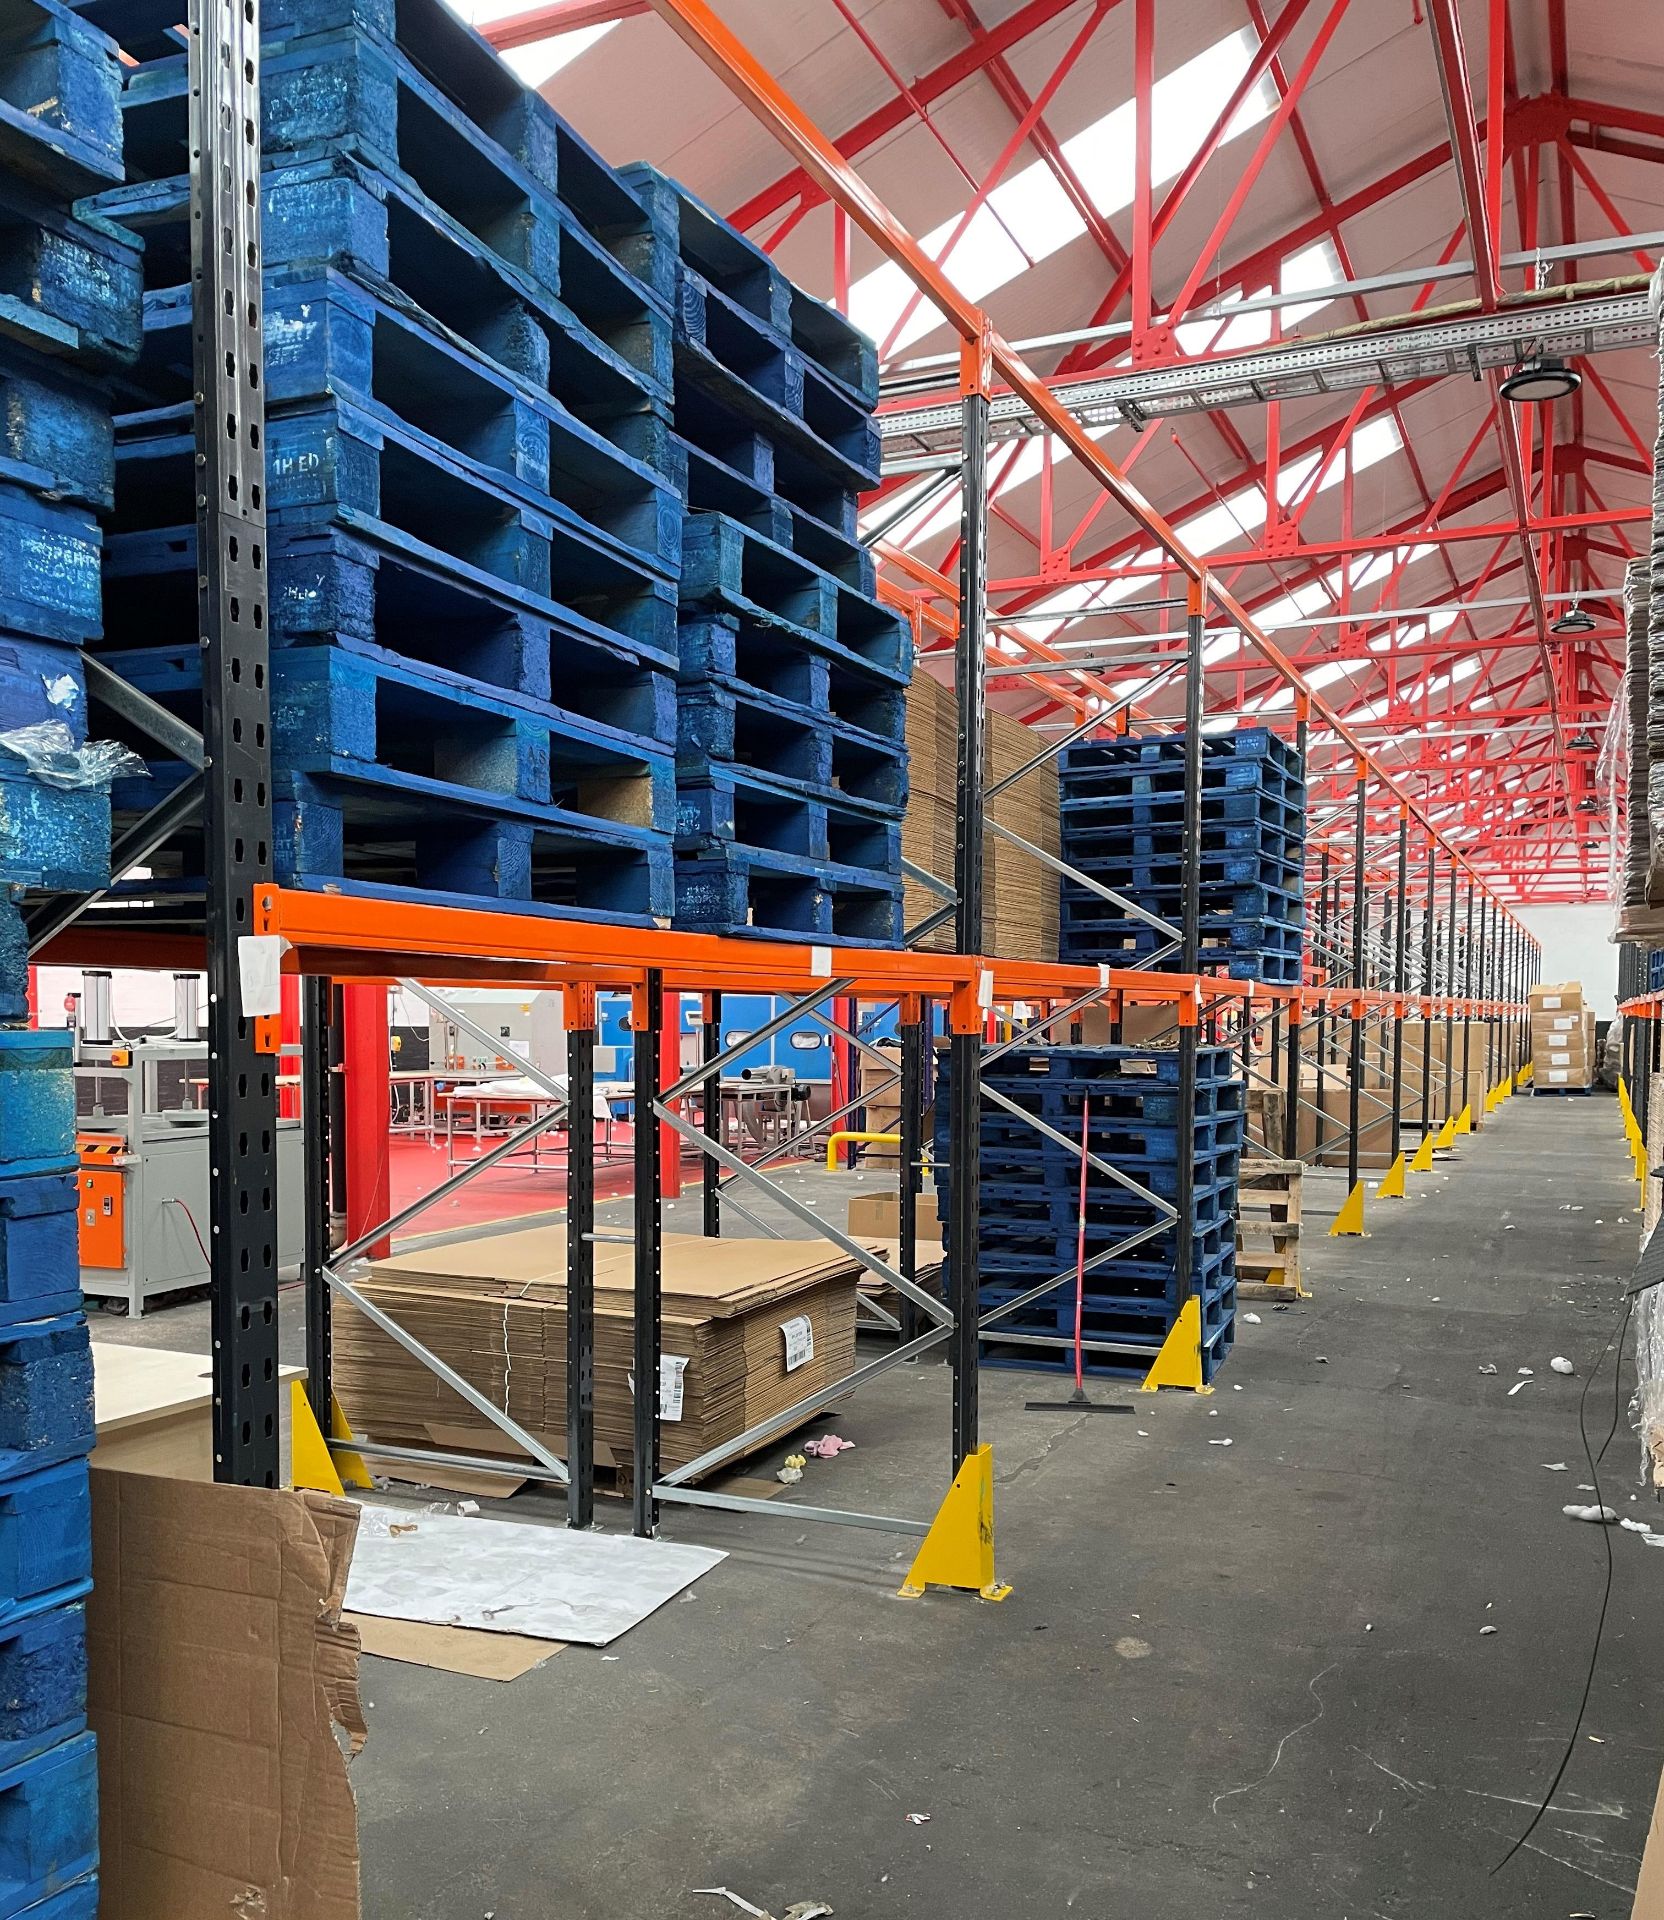 18 Bays of Link 51 Pallet Racking w/ Protection Barriers | CONTENTS NOT INCLUDED